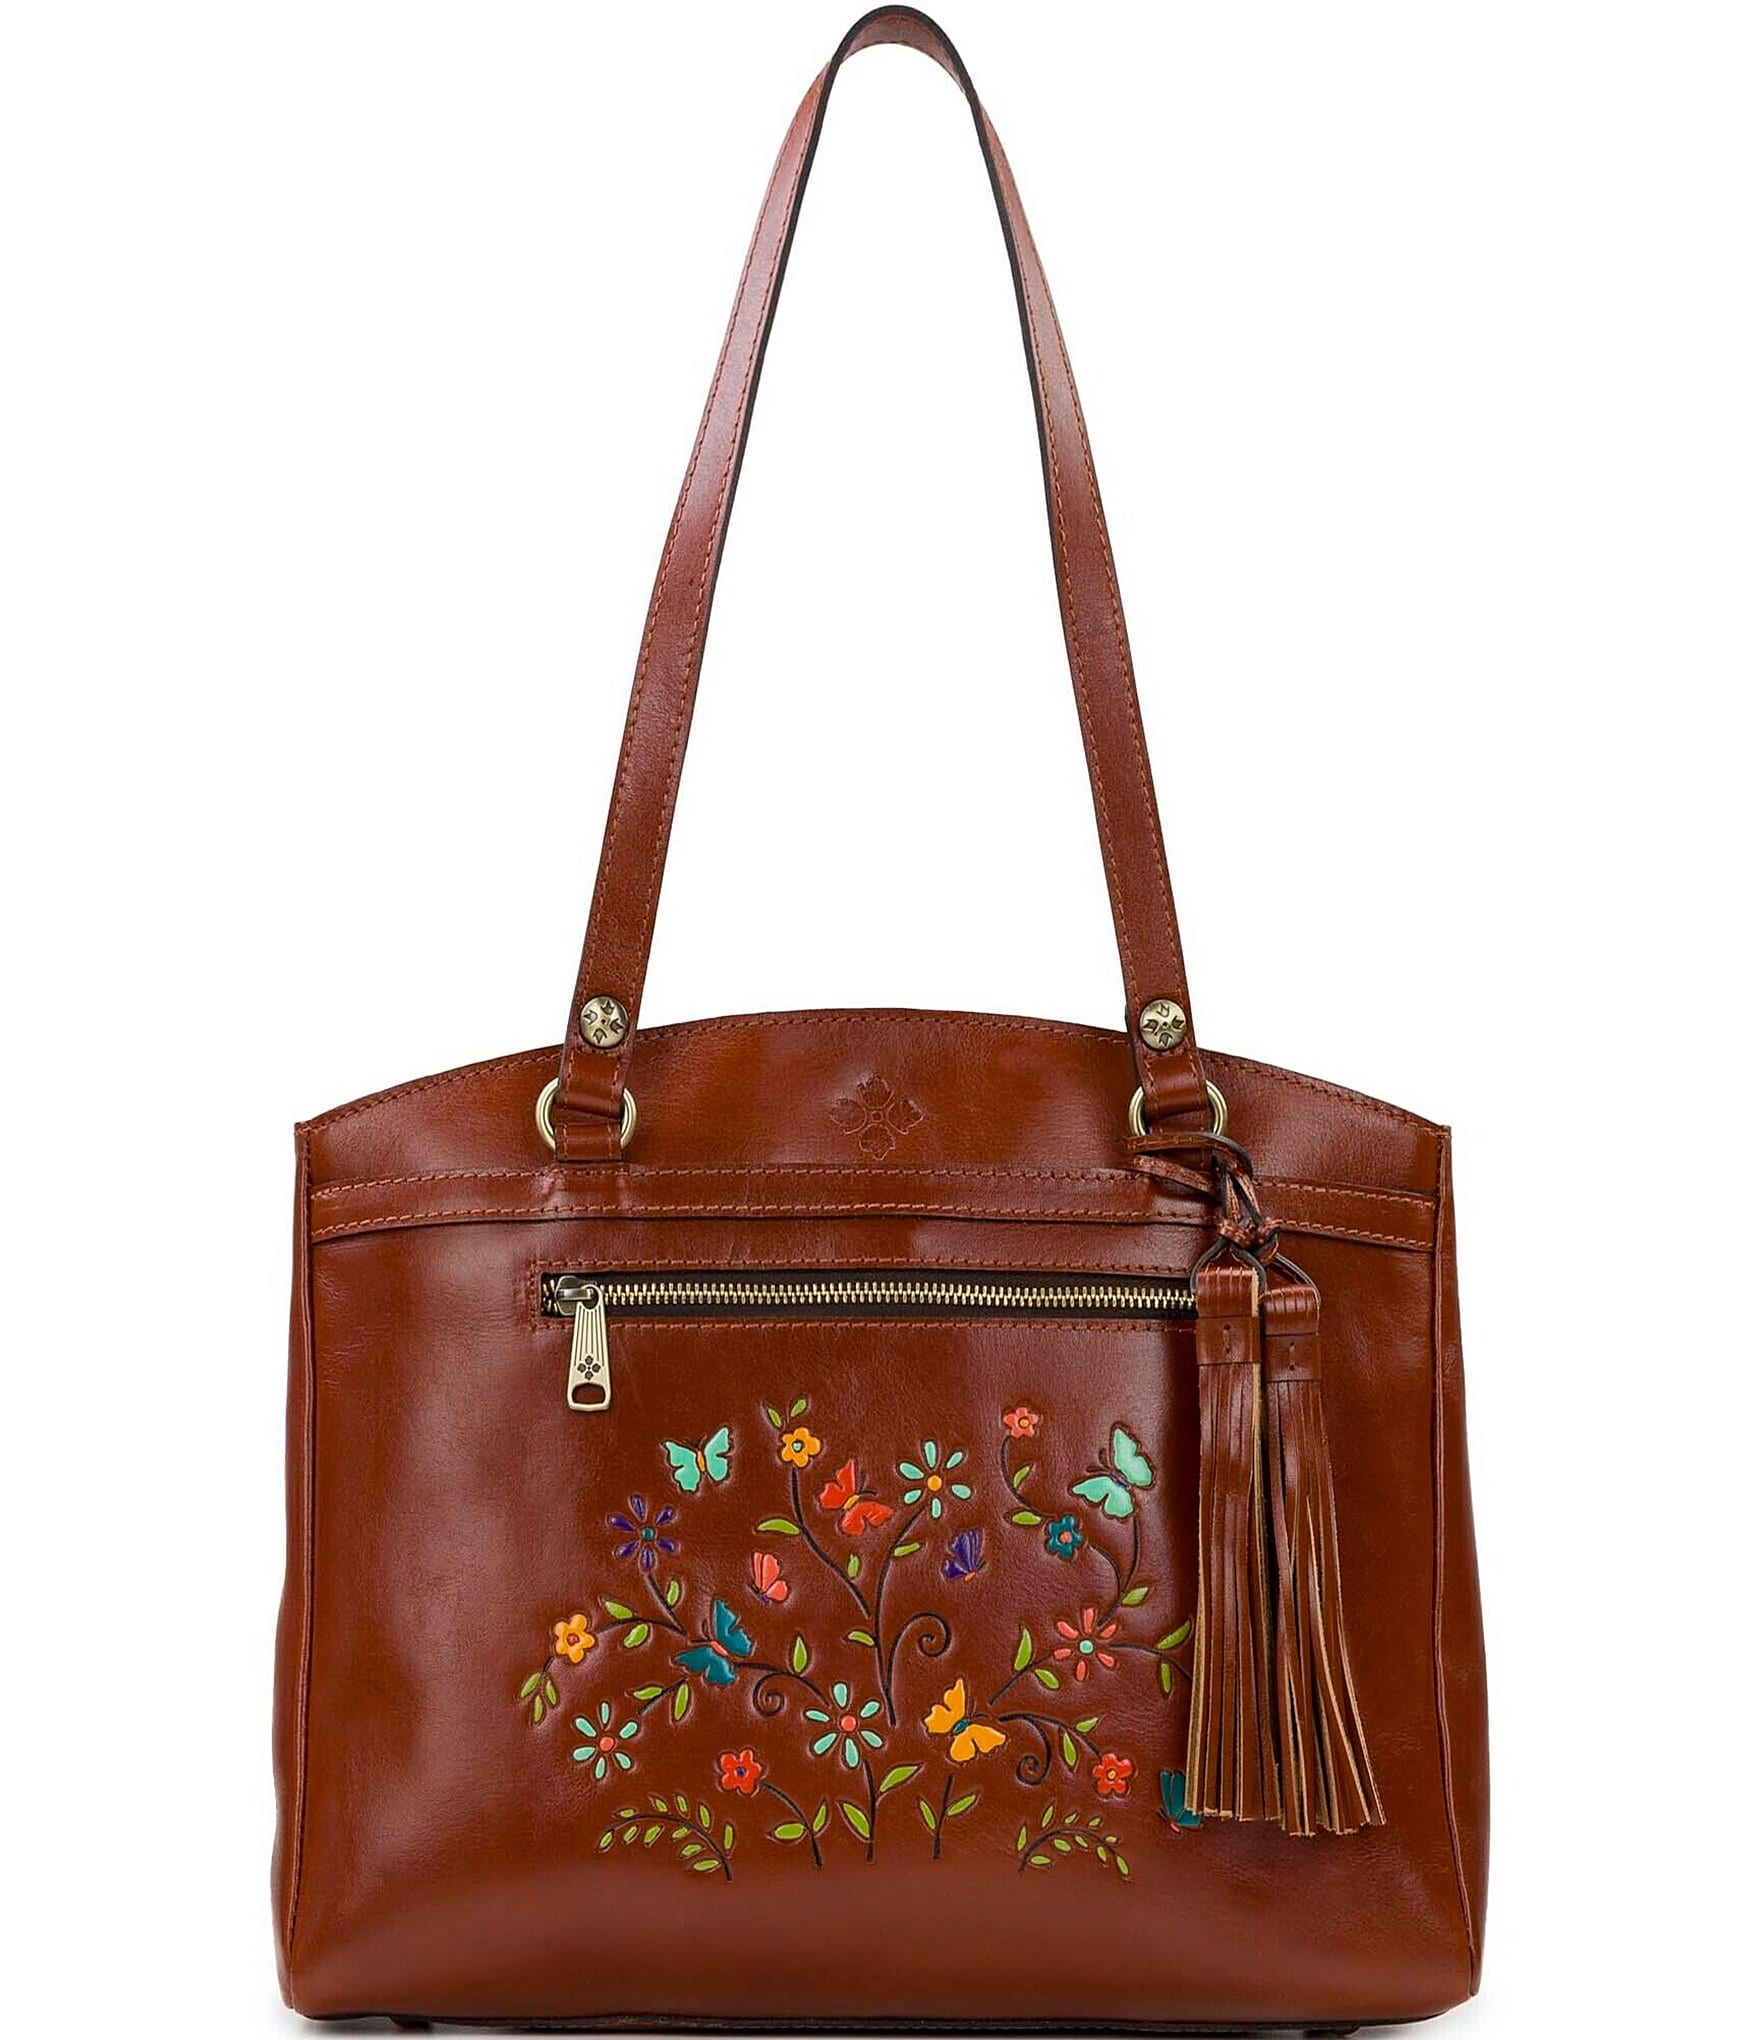 Patricia Nash Poppy Floral Embroidered Leather Tote Bag | Dillard's